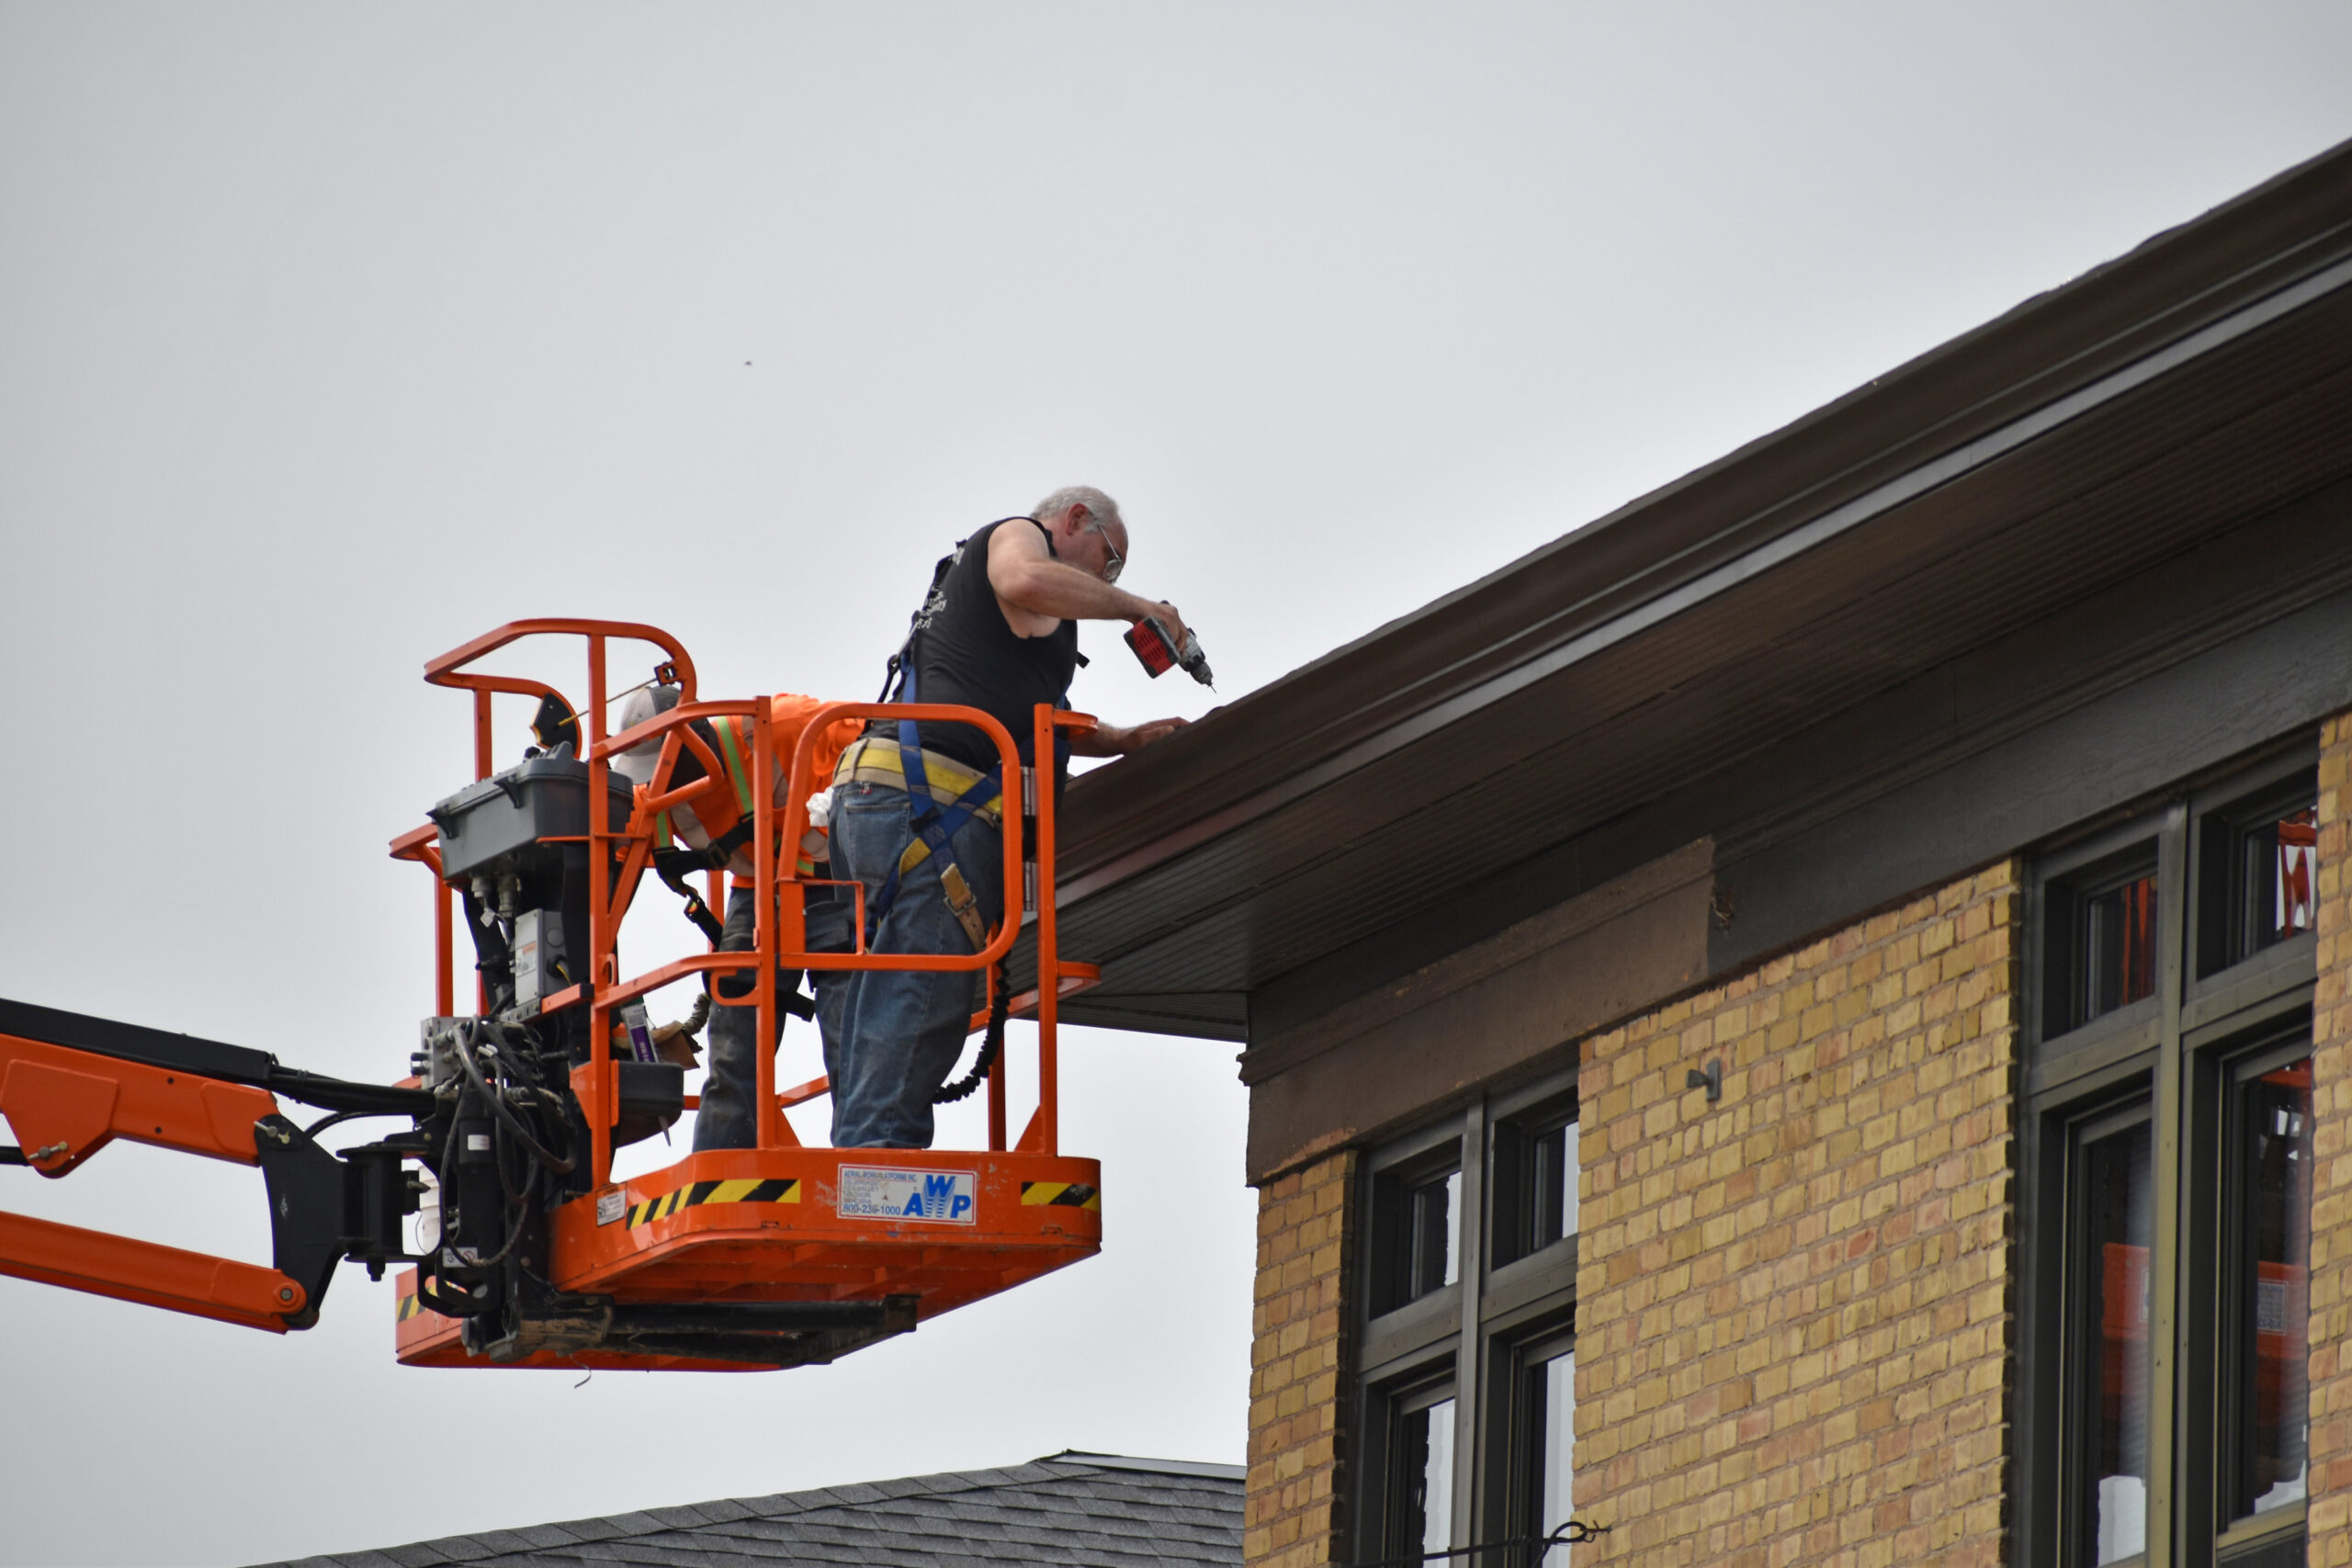 Contractors work on the exterior of the former Smith Elementary School in Oshkosh.